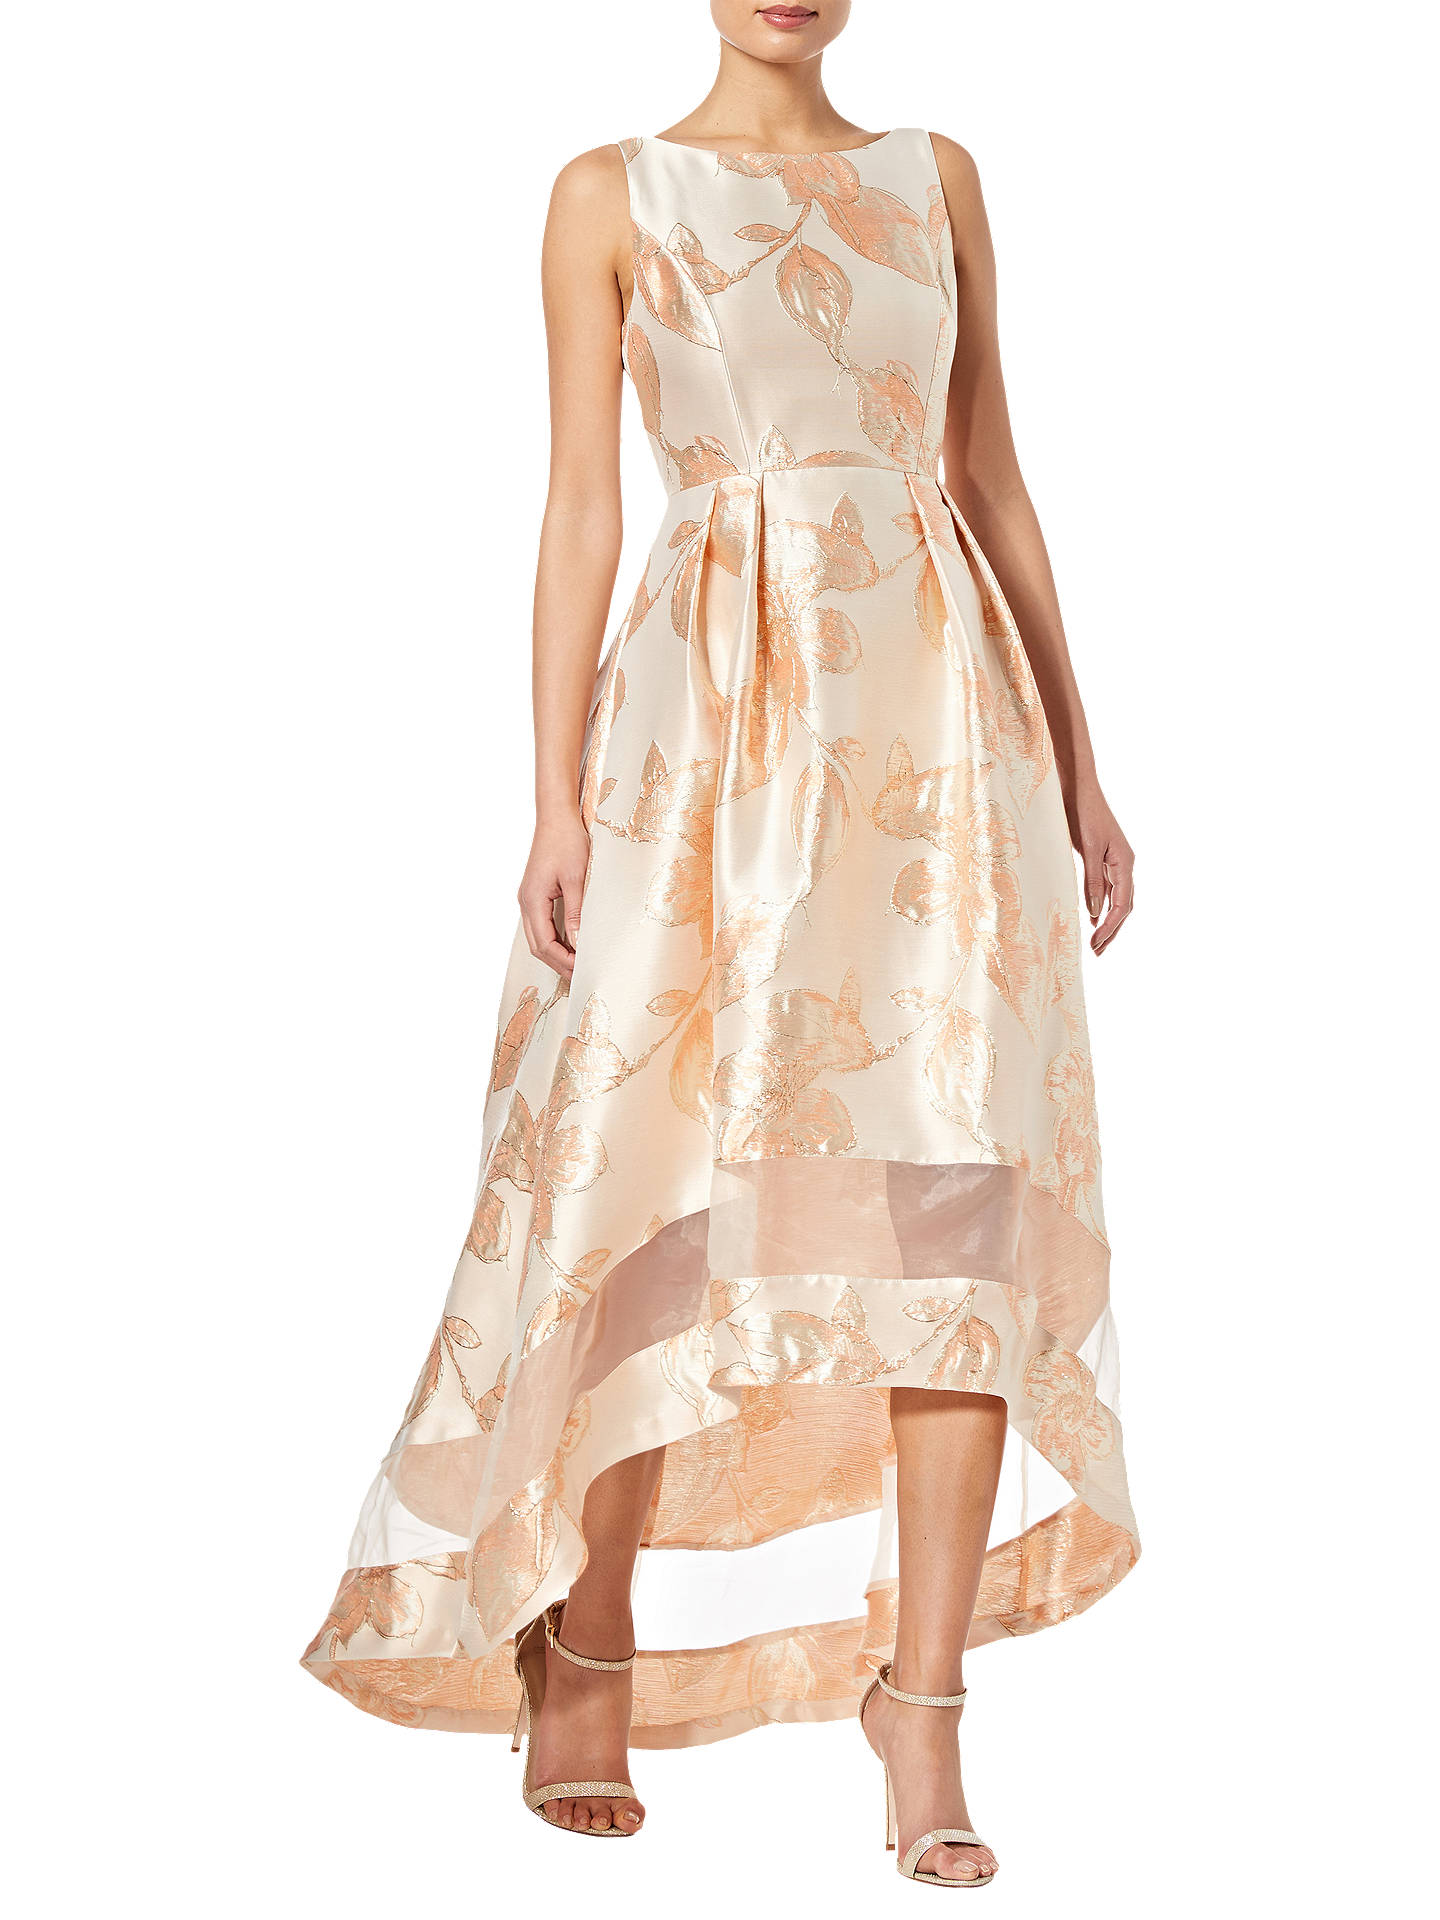 Adrianna Papell High Low Dress, Pale Peach Multi at John Lewis & Partners